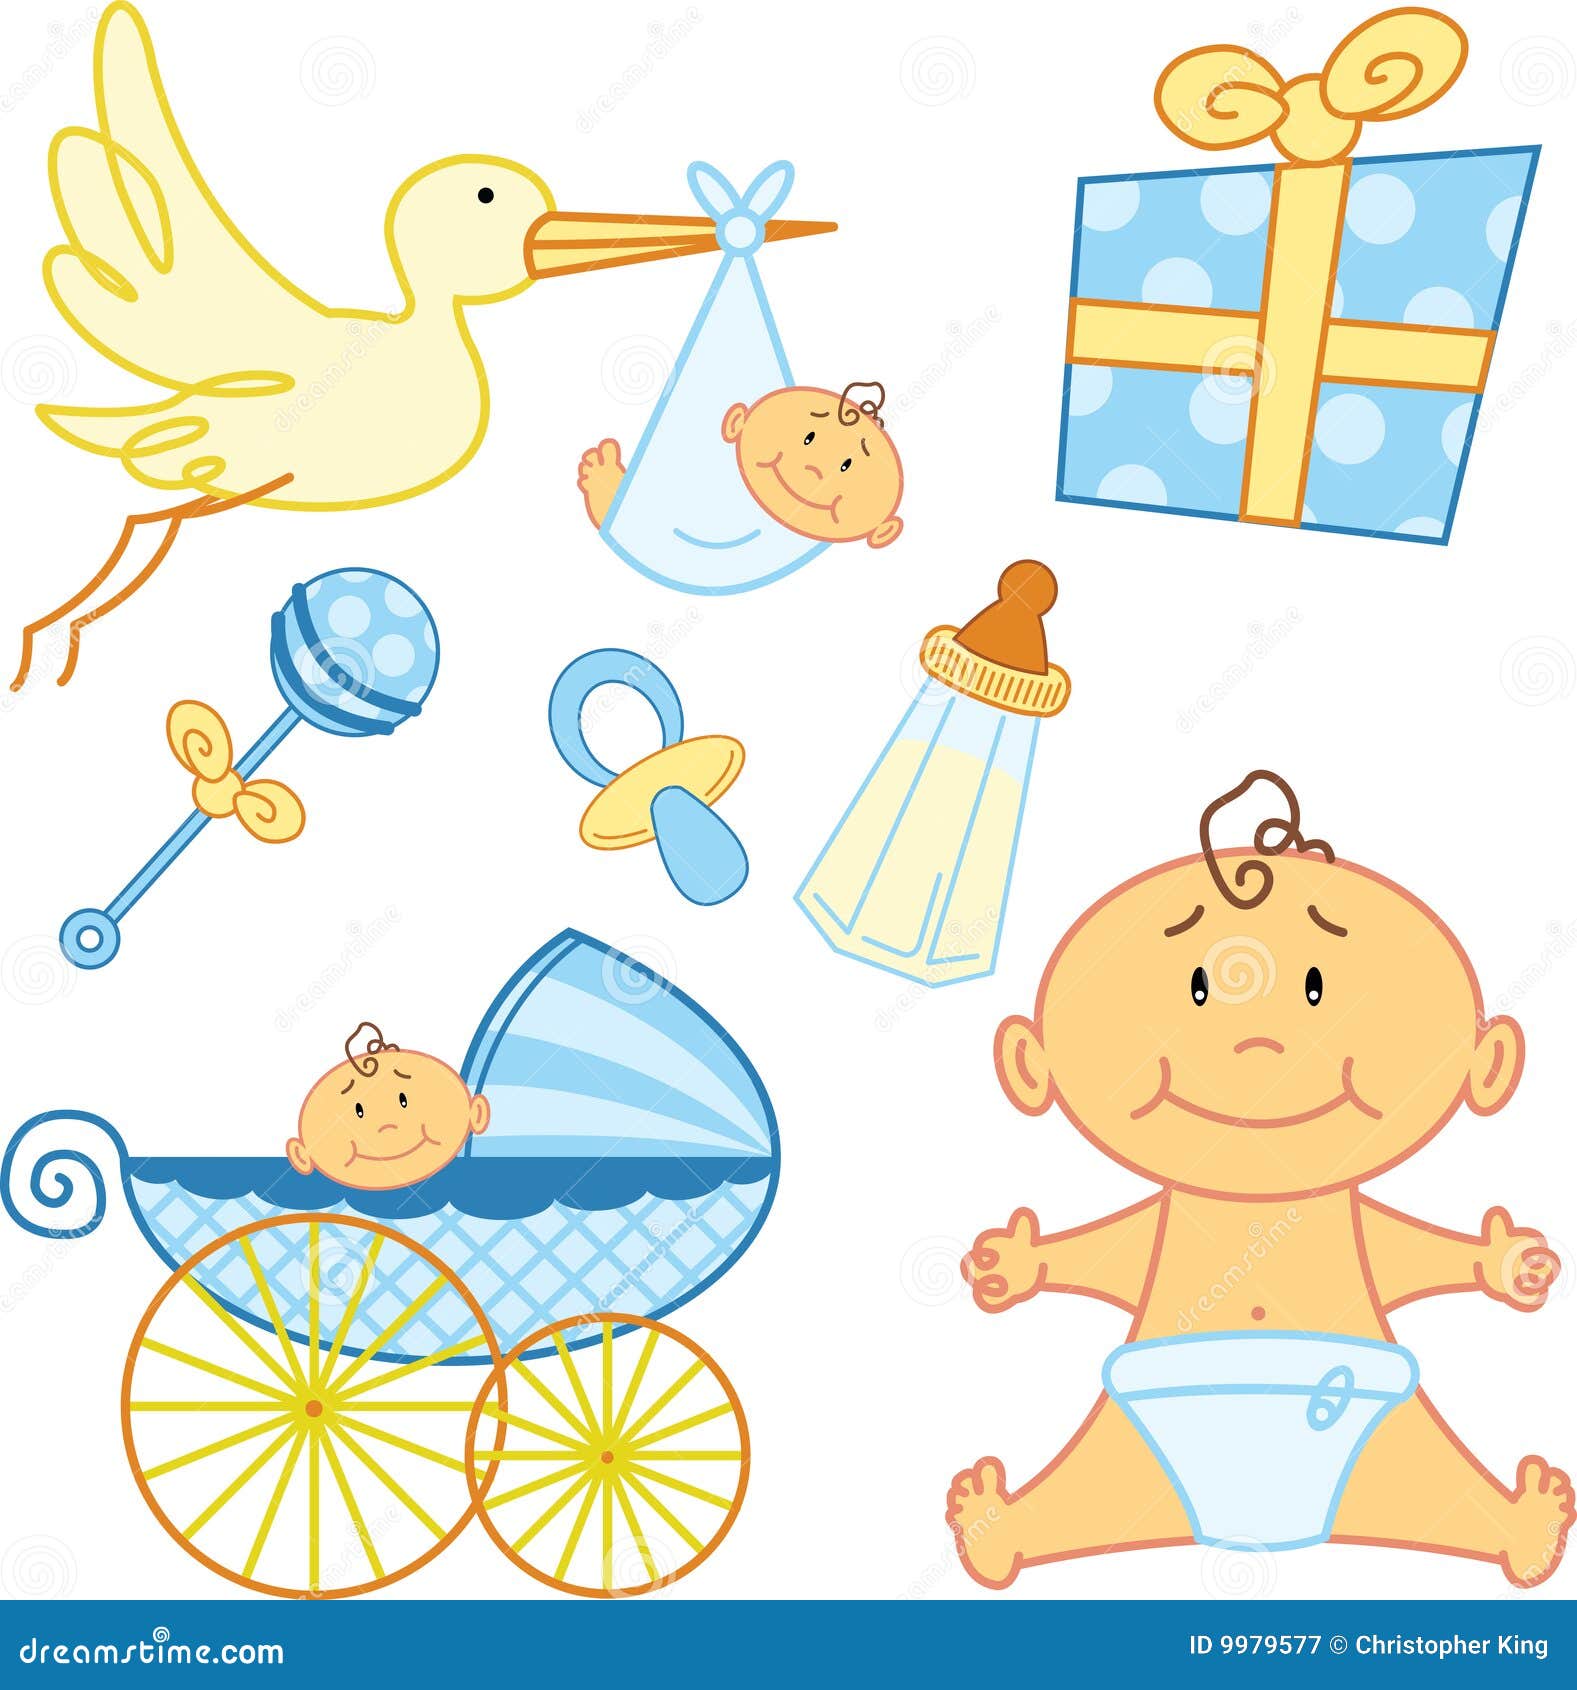 new baby clipart - photo #41